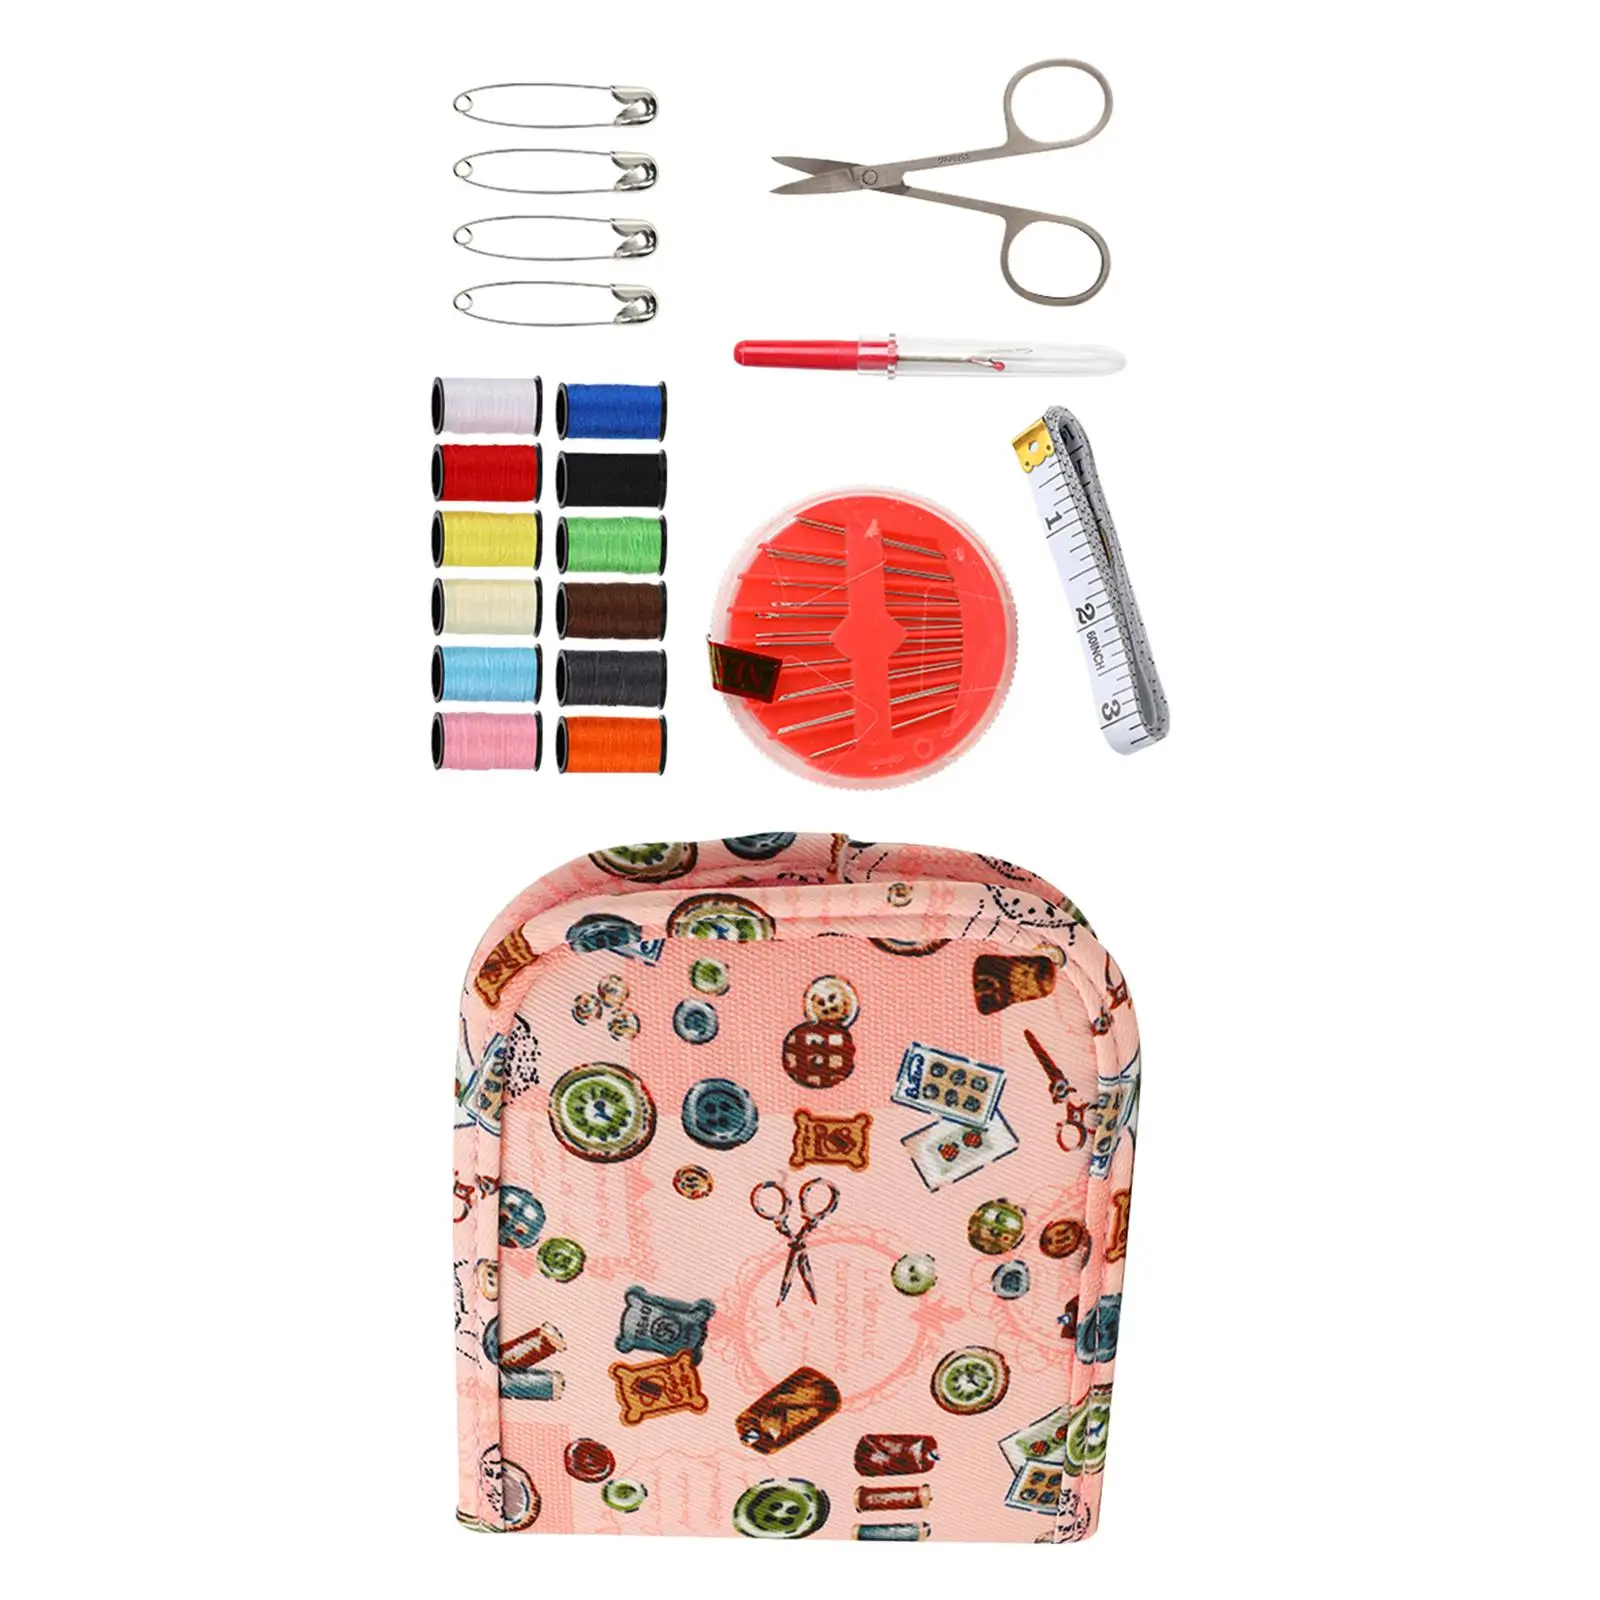 Thread Sewing Needle Set Sewing Kits Scissors Sewing Supplies with Carrying Case Handwork Tool Tape Measure Sewing Thread Set